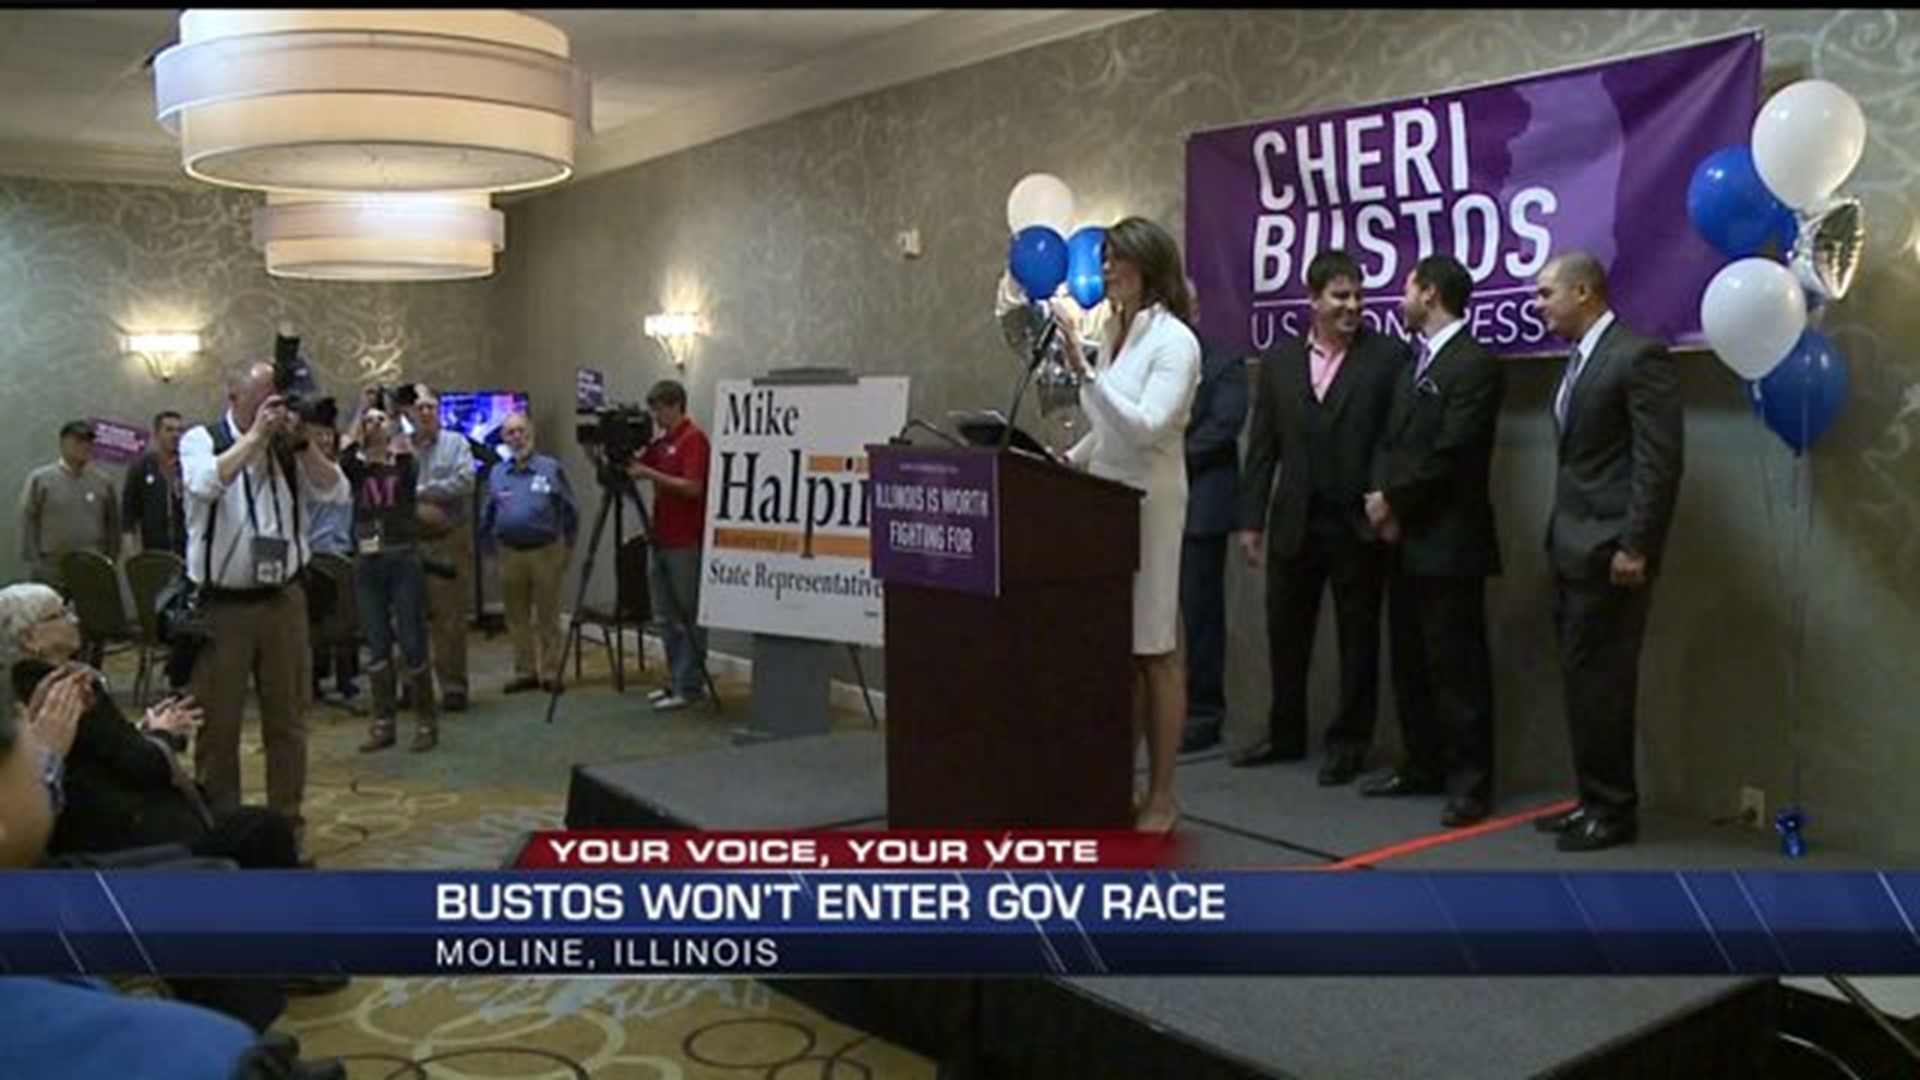 Cheri Bustos will not run for Illinois governor